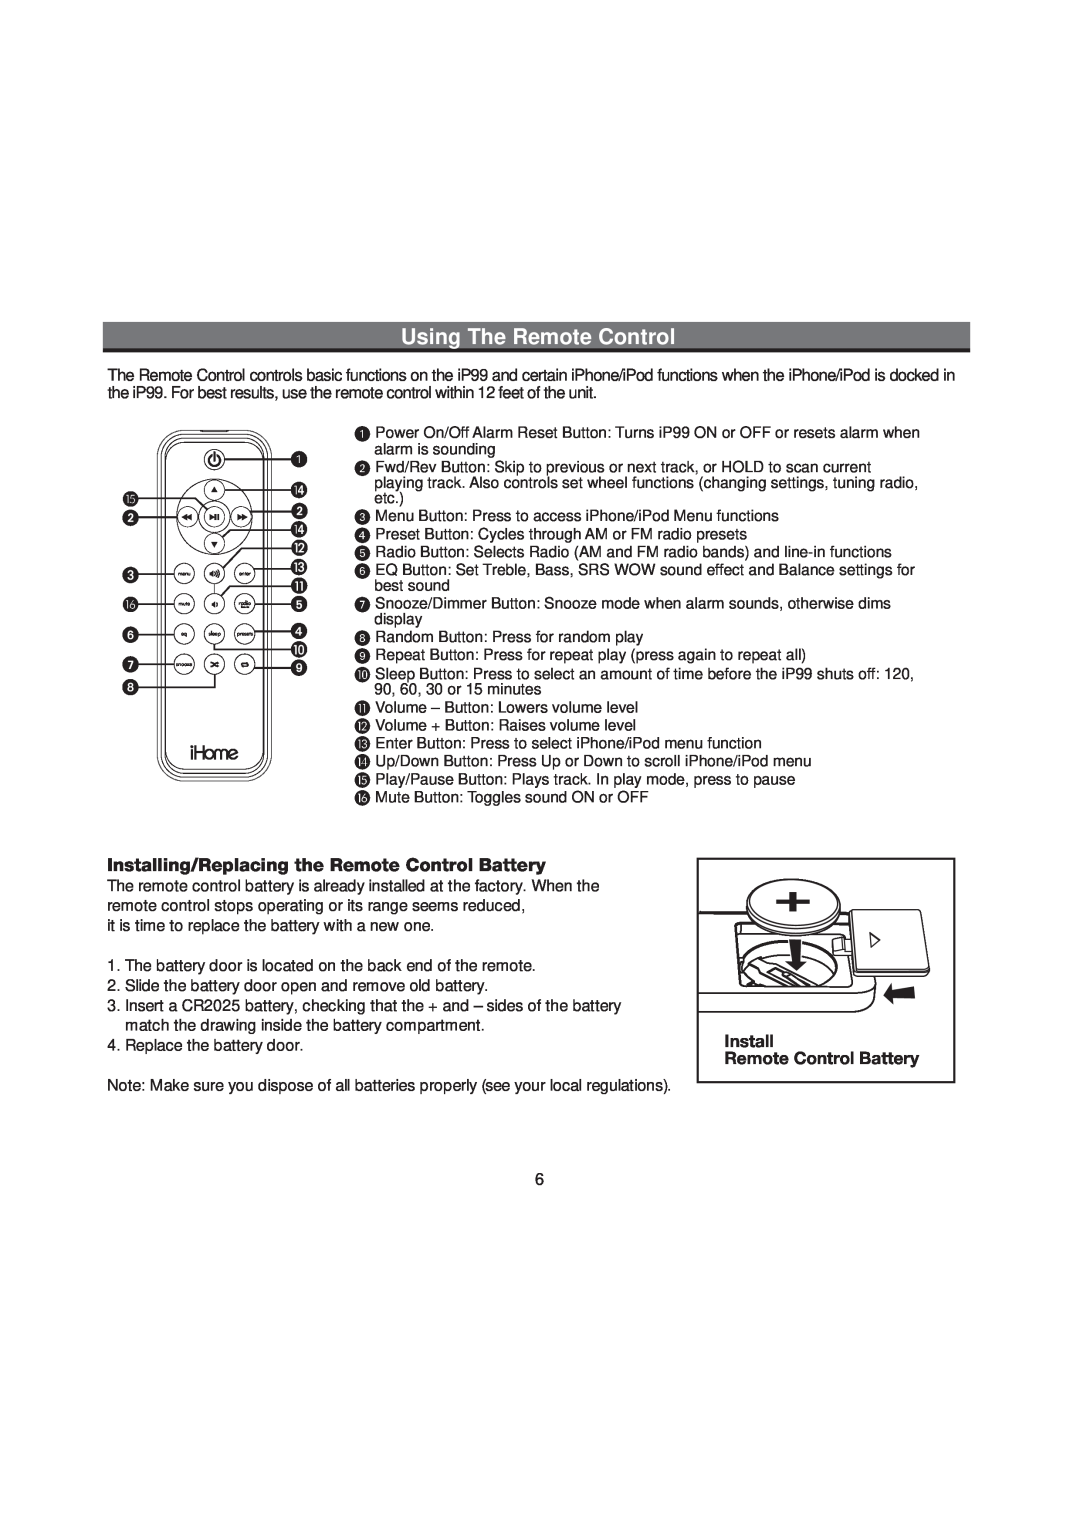 iHome iP99 manual Using The Remote Control, Installing/Replacing the Remote Control Battery 